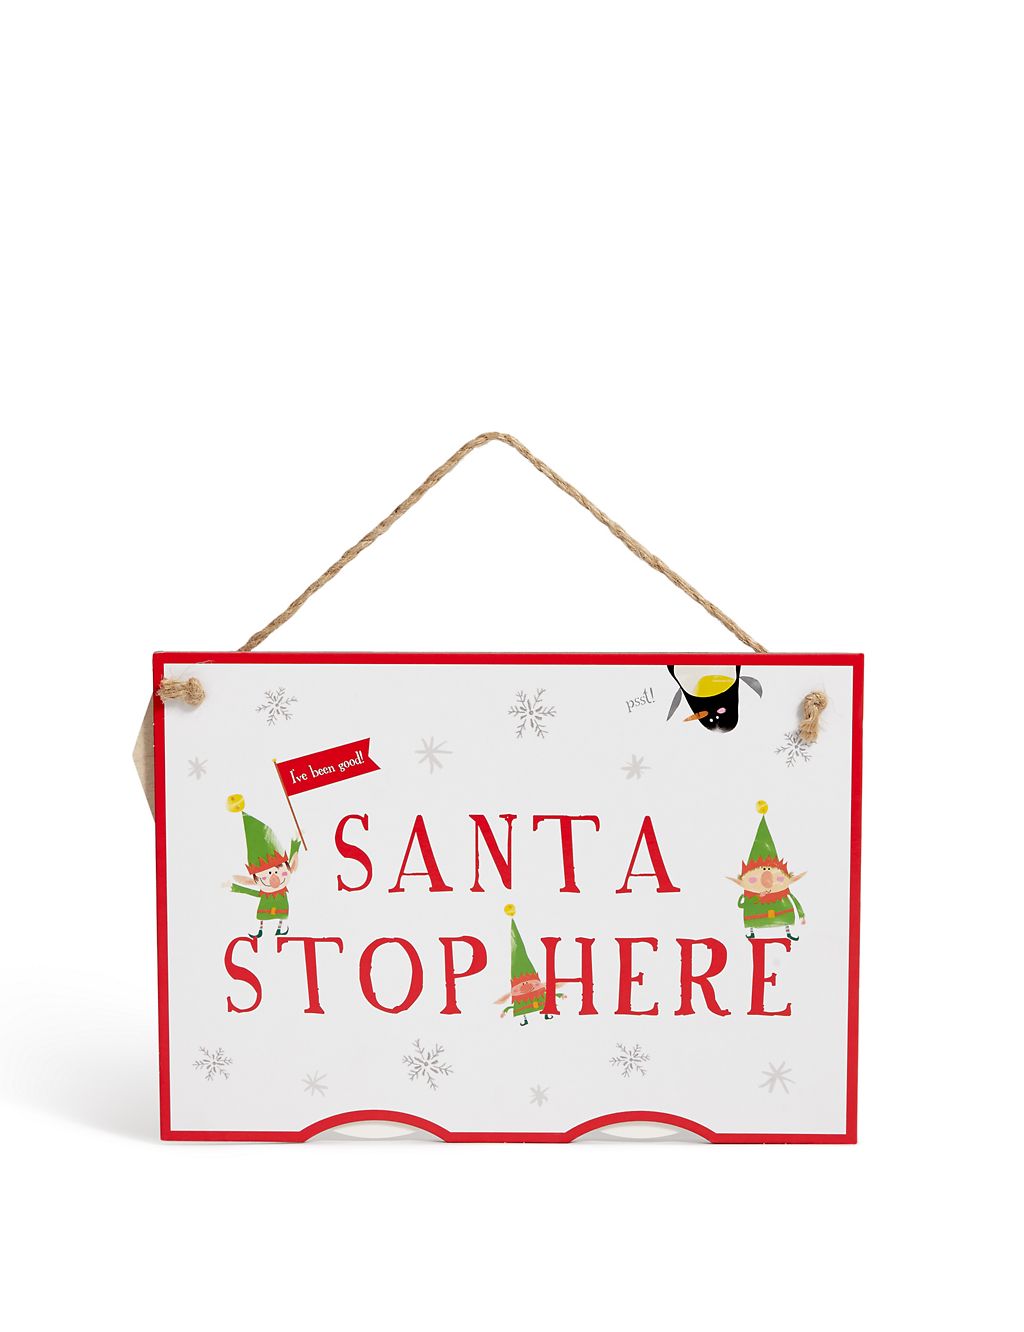 Christmas Countdown and Santa Stop Here Sign 1 of 4